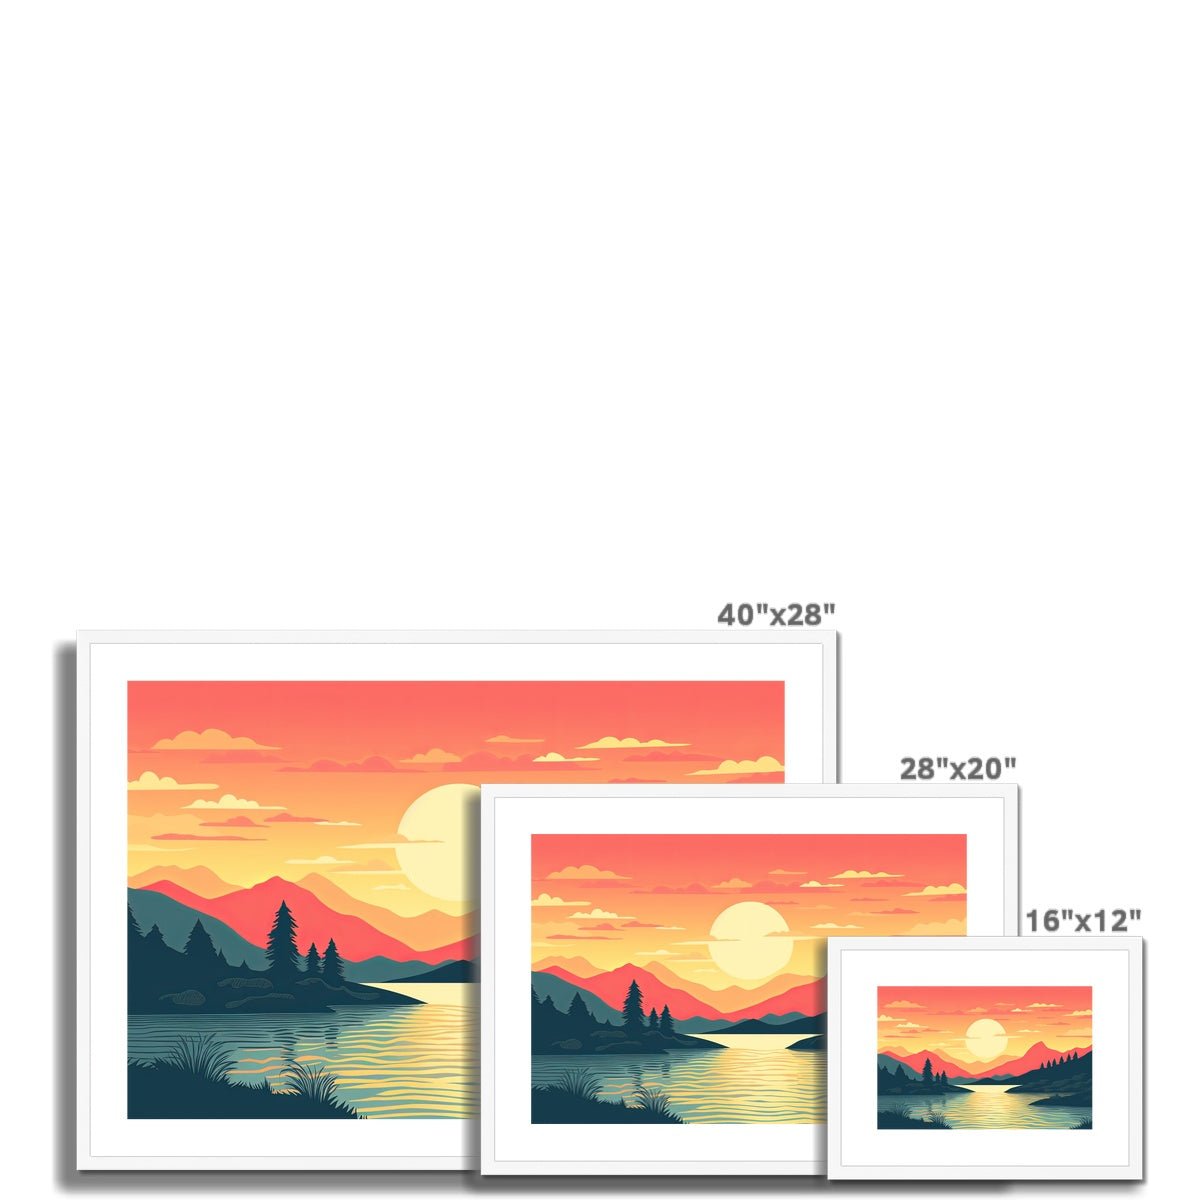 Sunset Dreams Framed & Mounted Print - Pixel Gallery